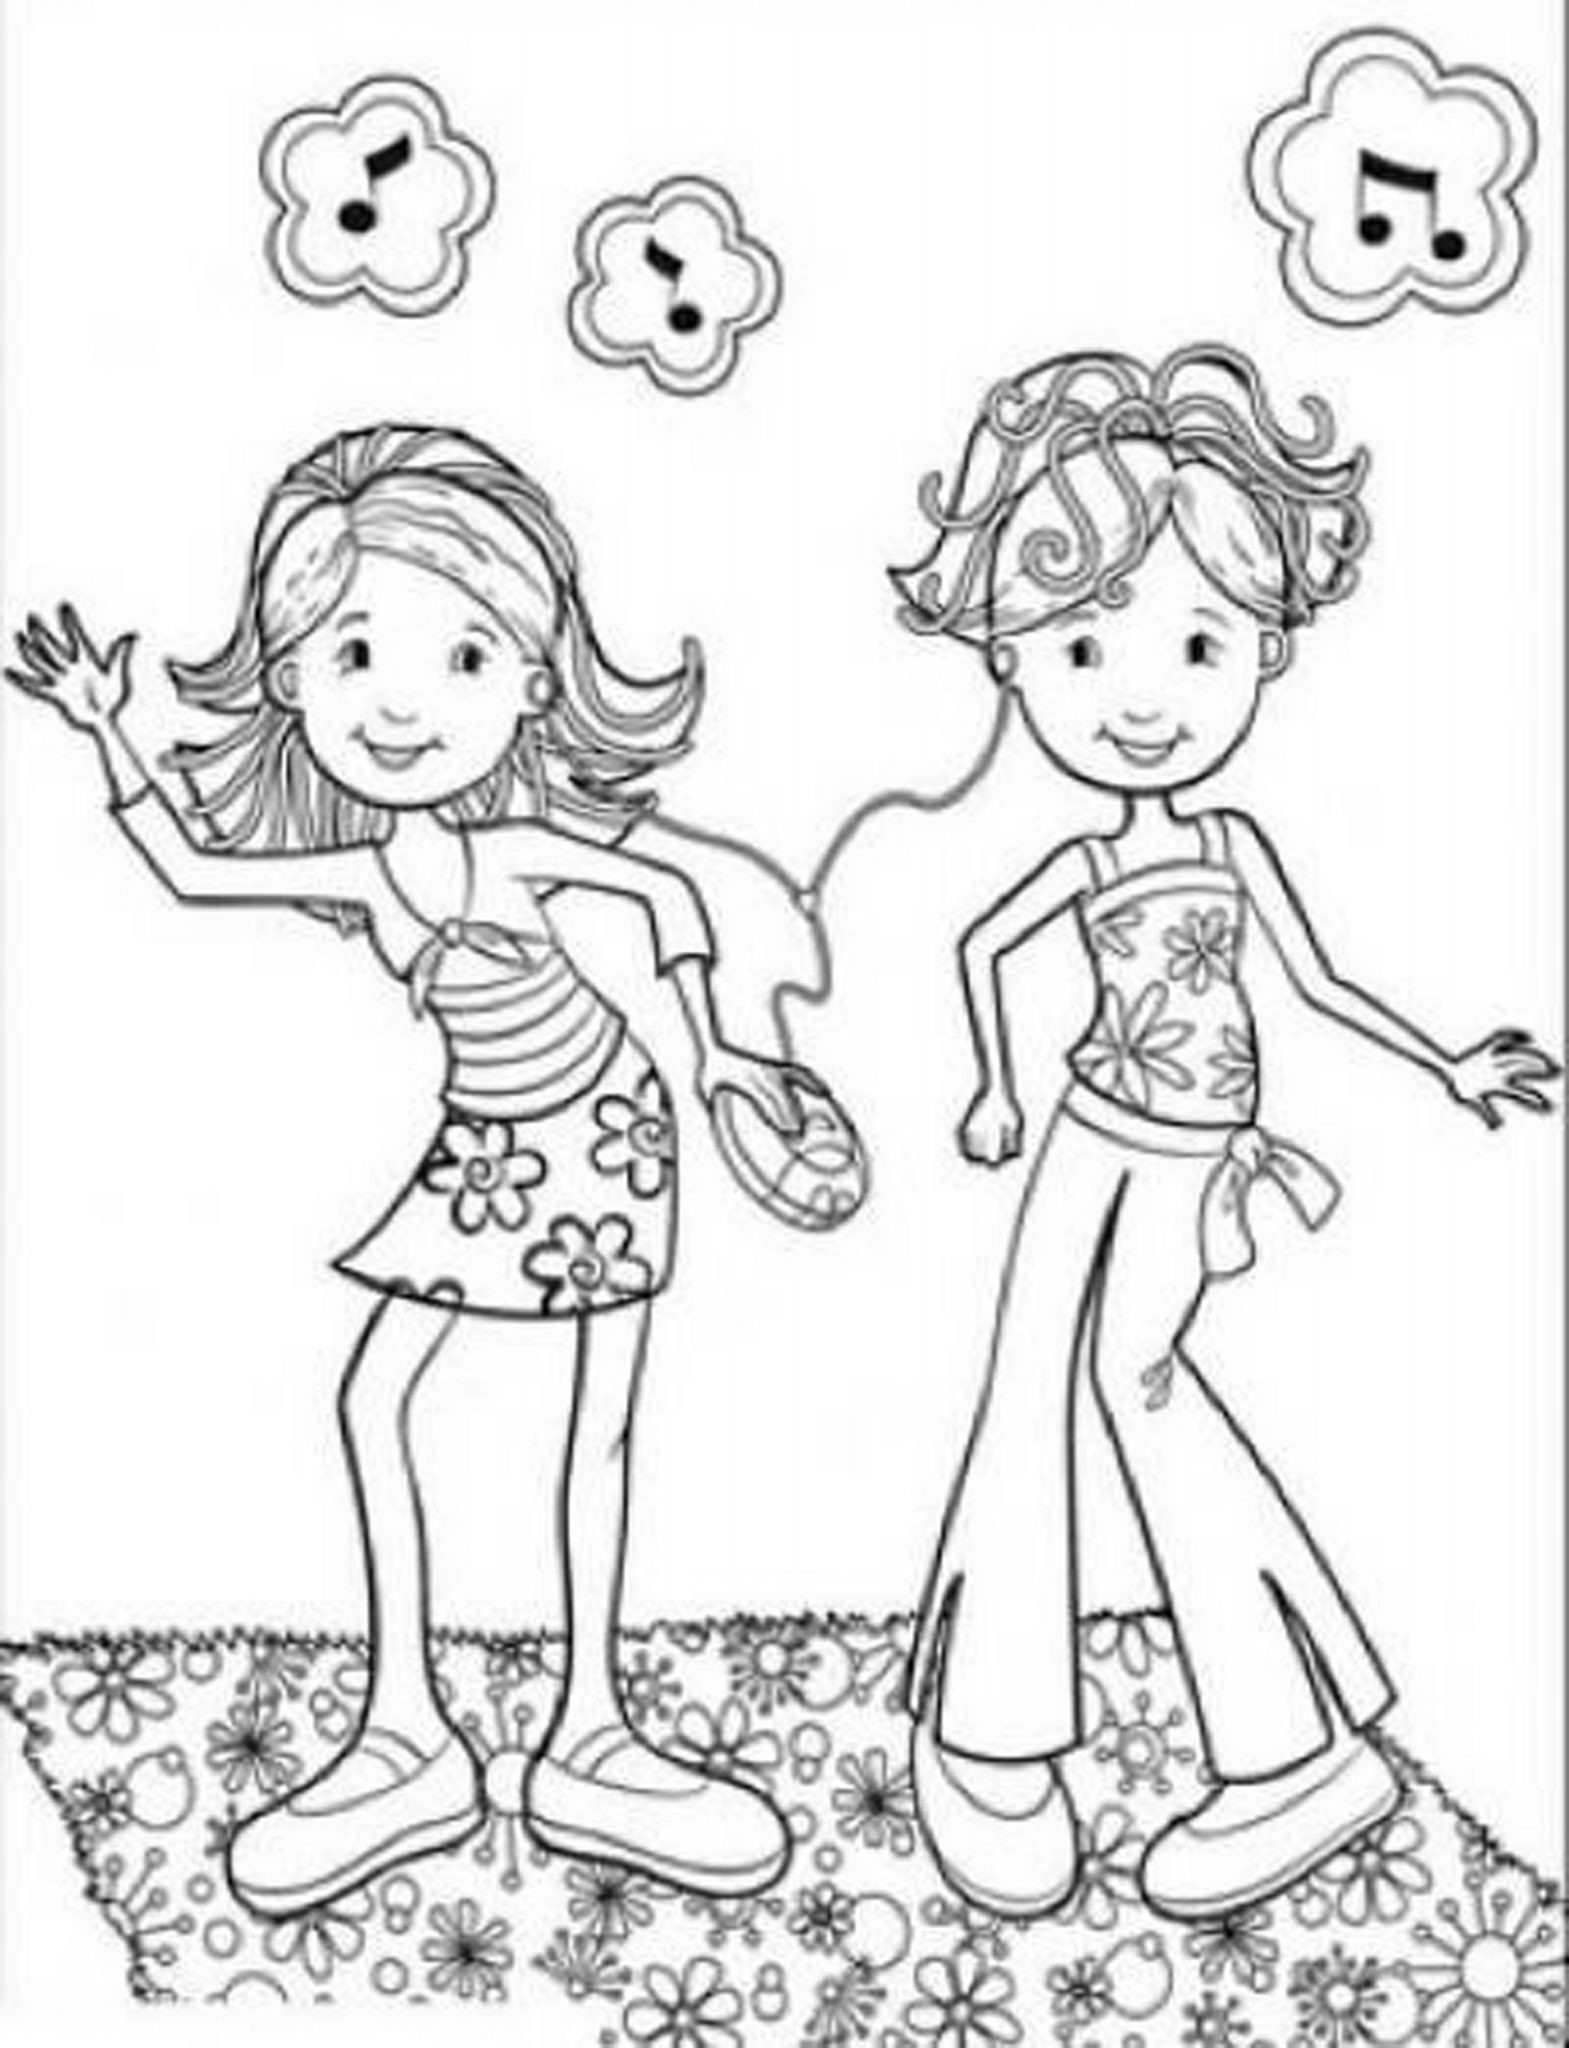 Cute Coloring Sheets For Girls
 cute coloring pages for girls